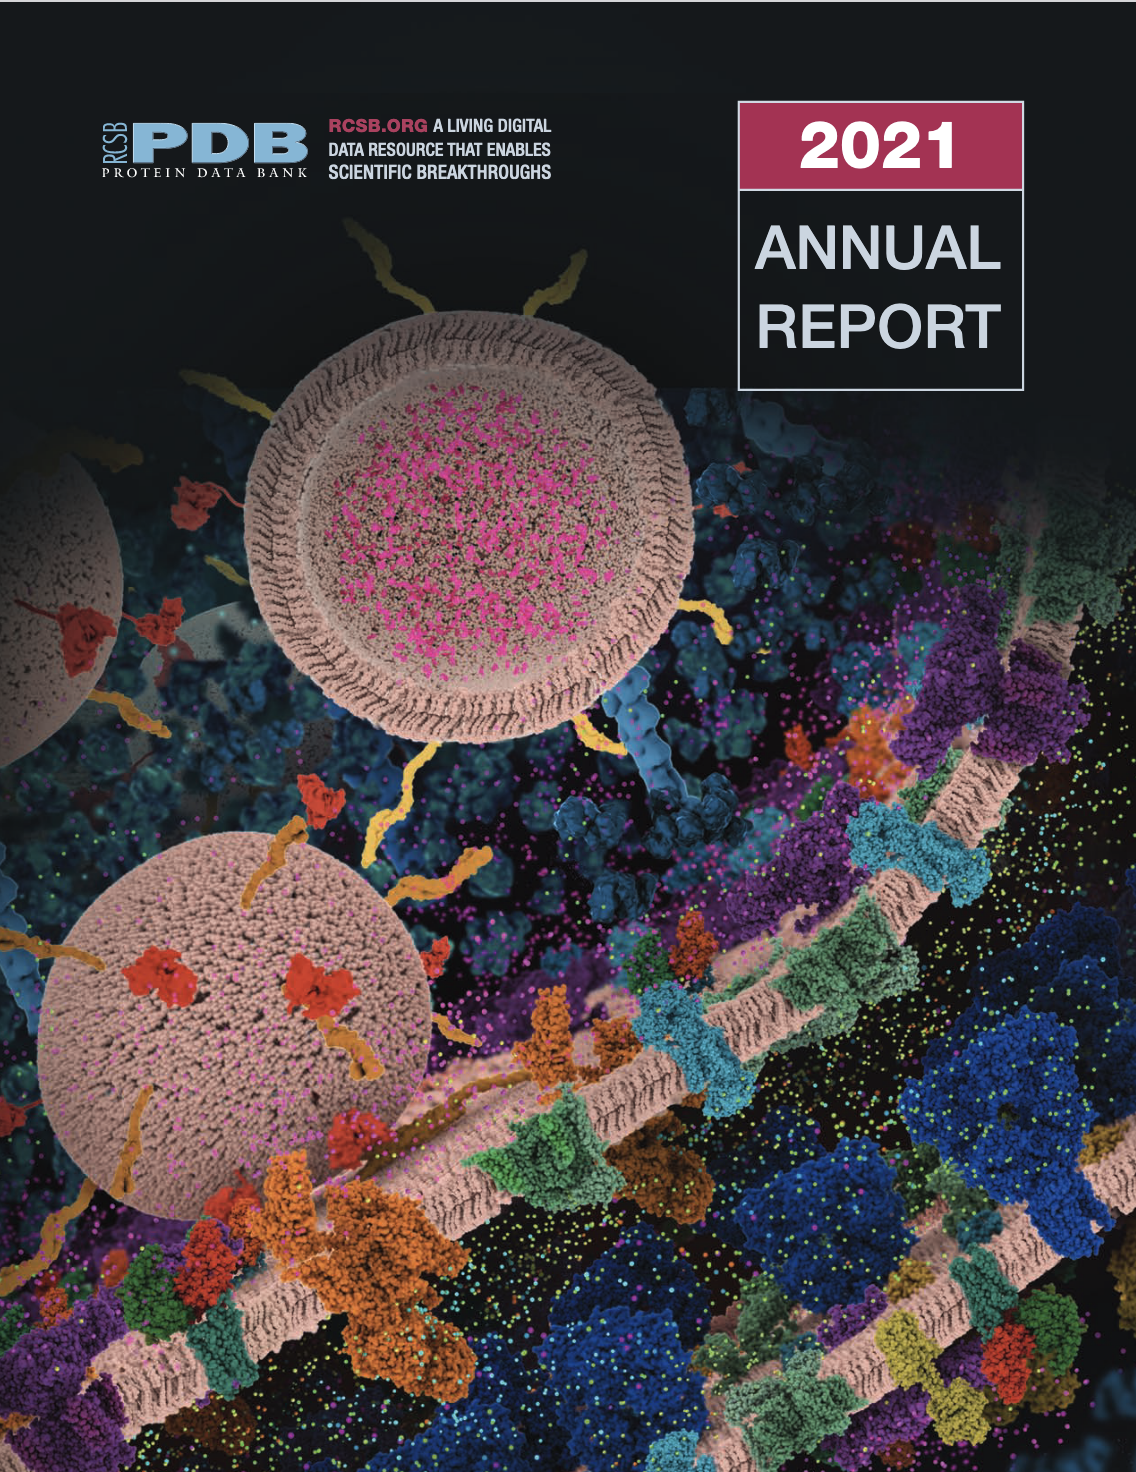 <a href="https://cdn.rcsb.org/rcsb-pdb/general_information/news_publications/annual_reports/annual_report_year_2021.pdf">Download the 2021 Annual Report PDF</a>